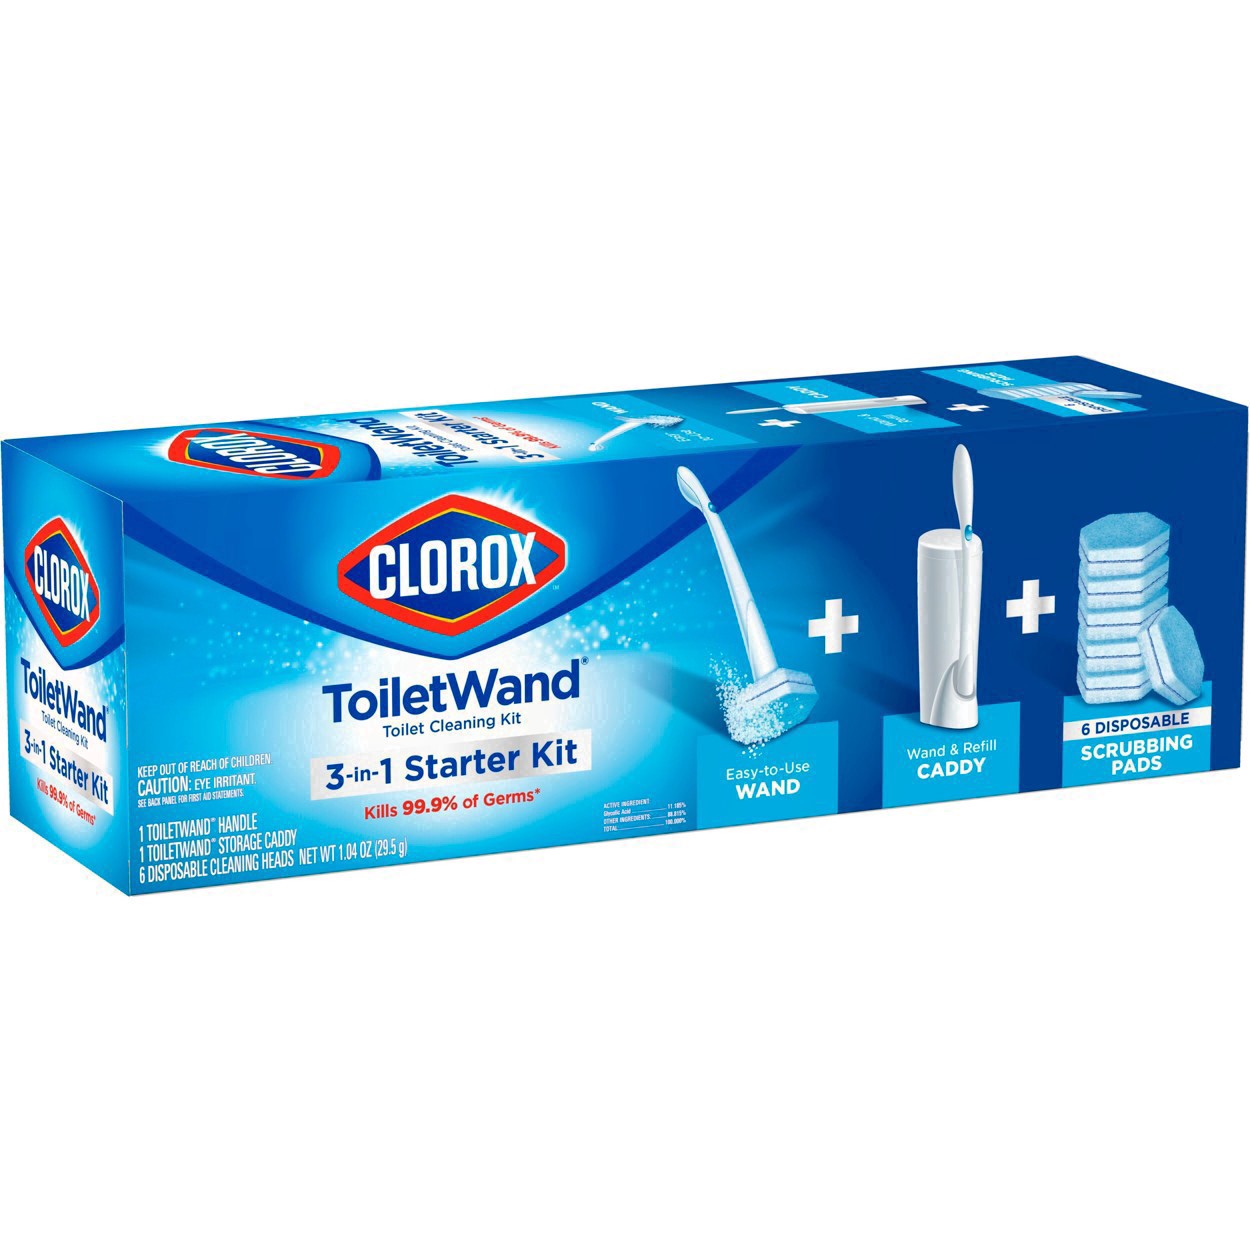 slide 49 of 176, Clorox Toilet Wand 3-in-1 Starter Toliet Cleaning Kit, 1 ct